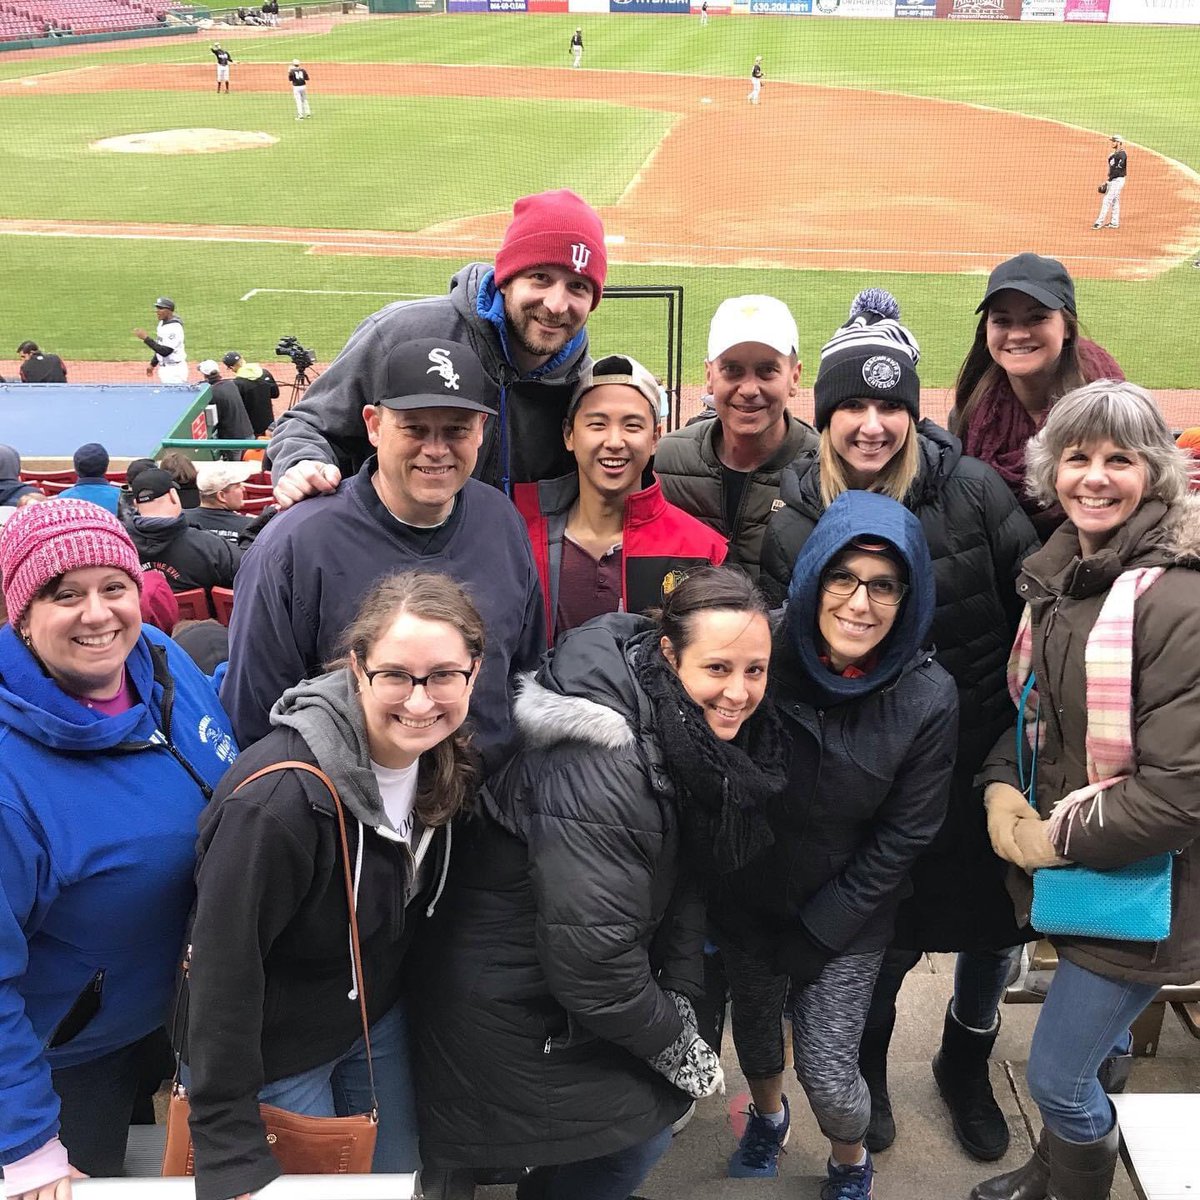 On this date one year ago... @washcusd200 teachers at the Kane County Cougars baseball game for Ozzie’s Reading Club #yourcommunityschools